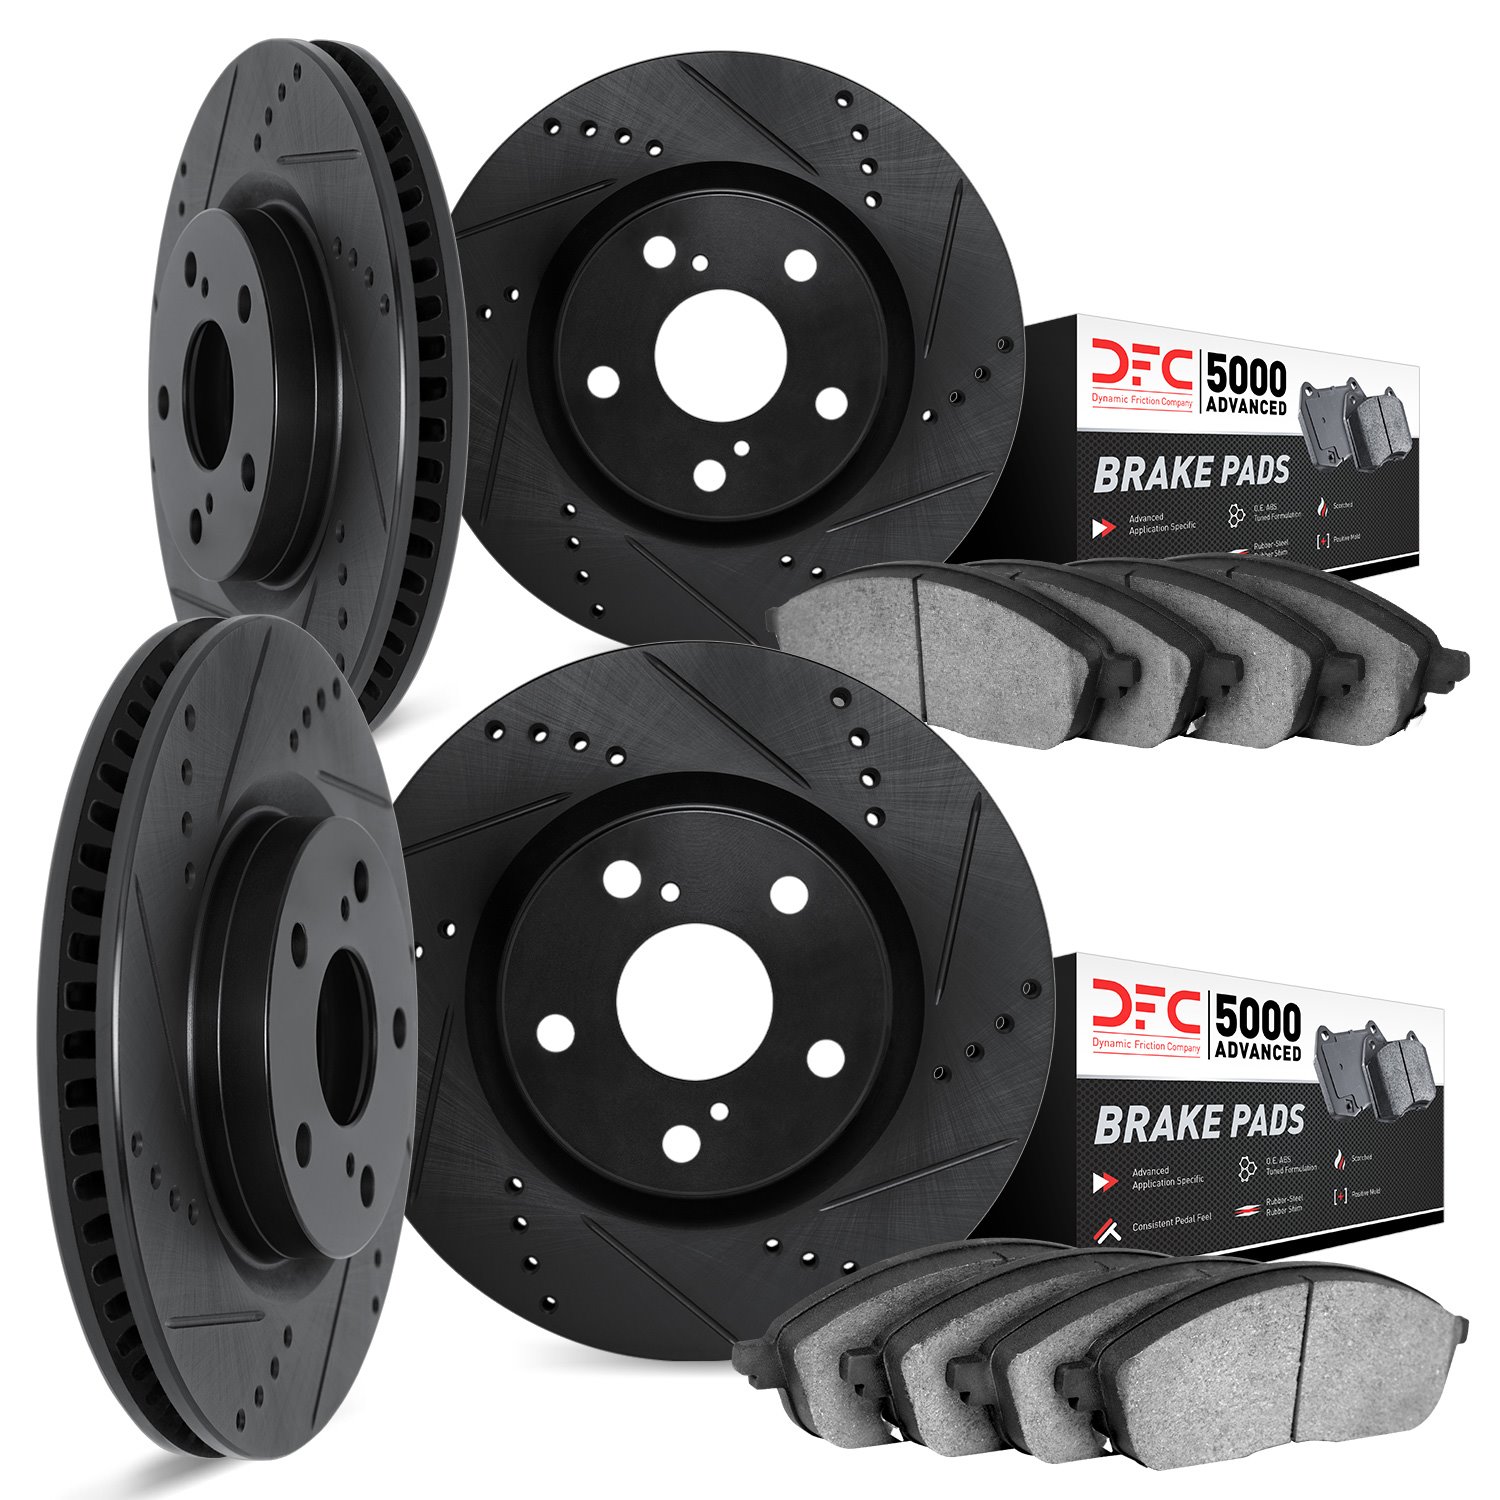 8504-31085 Drilled/Slotted Brake Rotors w/5000 Advanced Brake Pads Kit [Black], 2018-2021 BMW, Position: Front and Rear